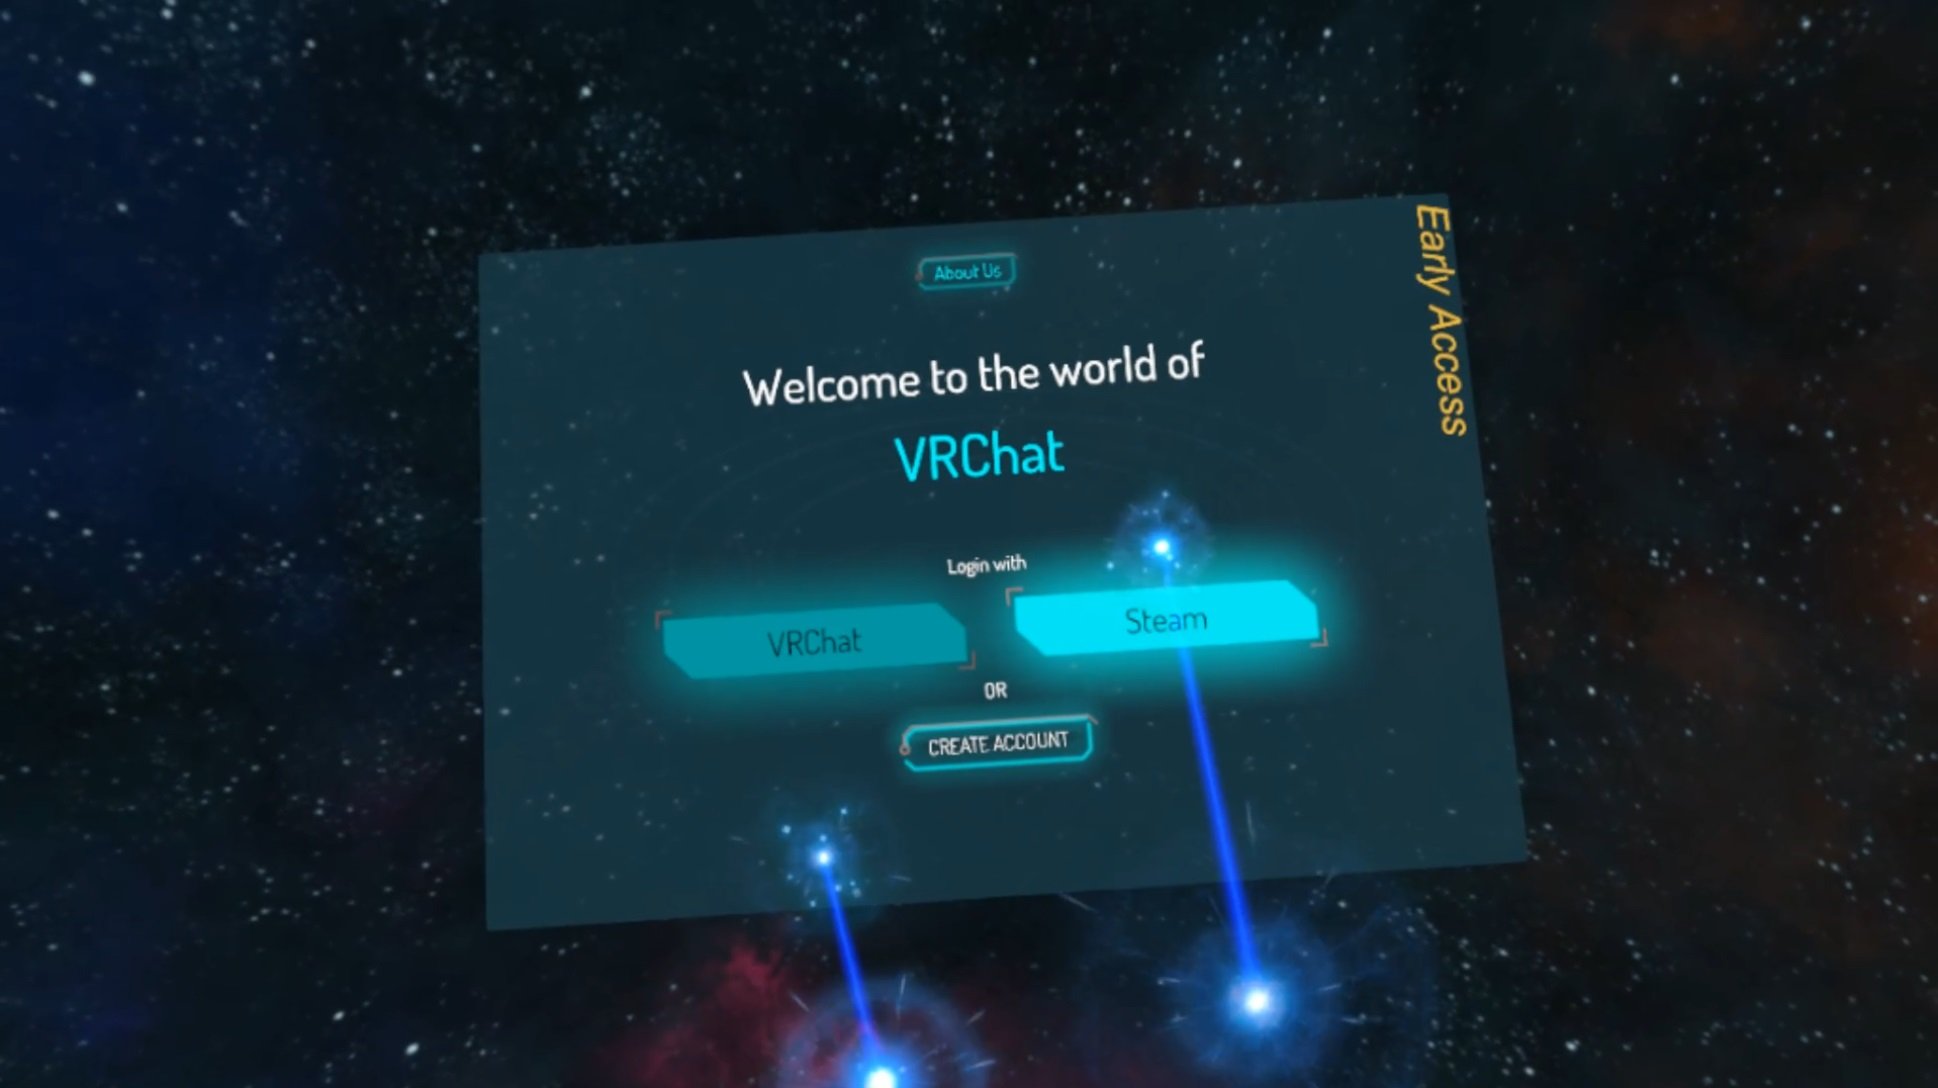 Signing in to VRChat